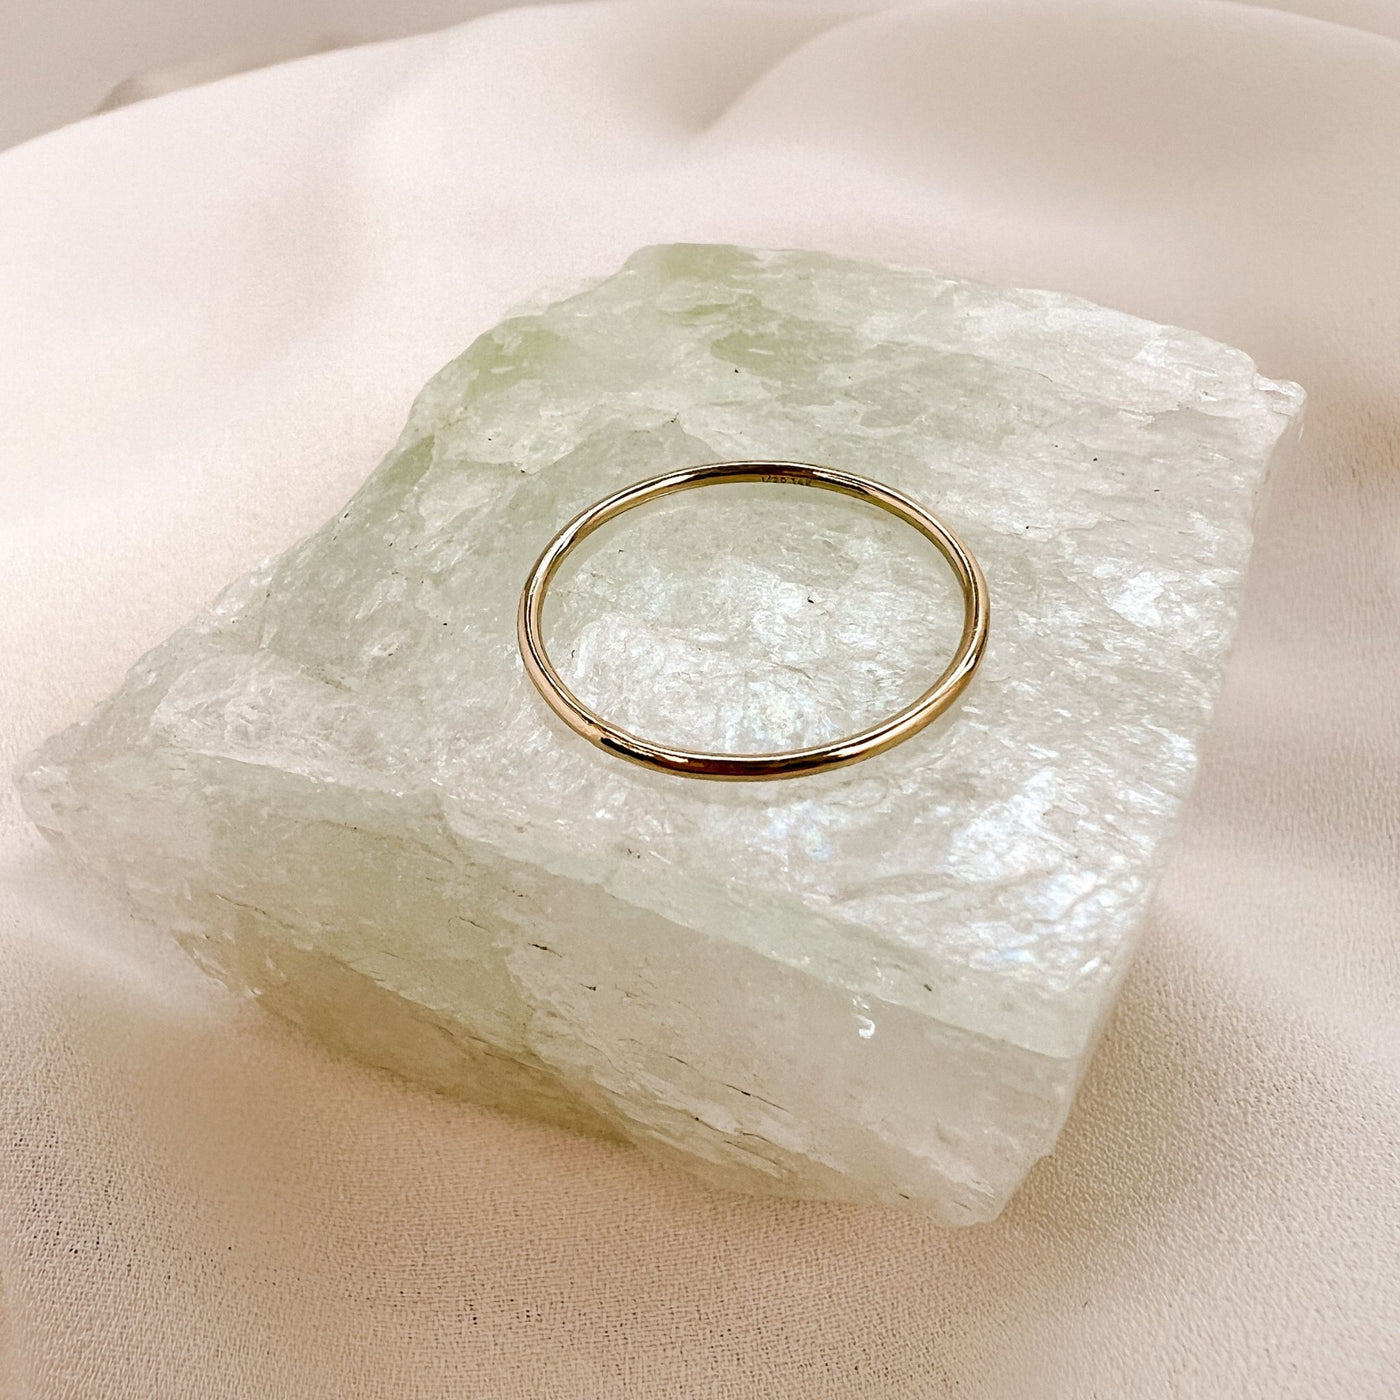 Simple 14Kgold filled 1mm band ring displayed onto of a qua coloured gemstone